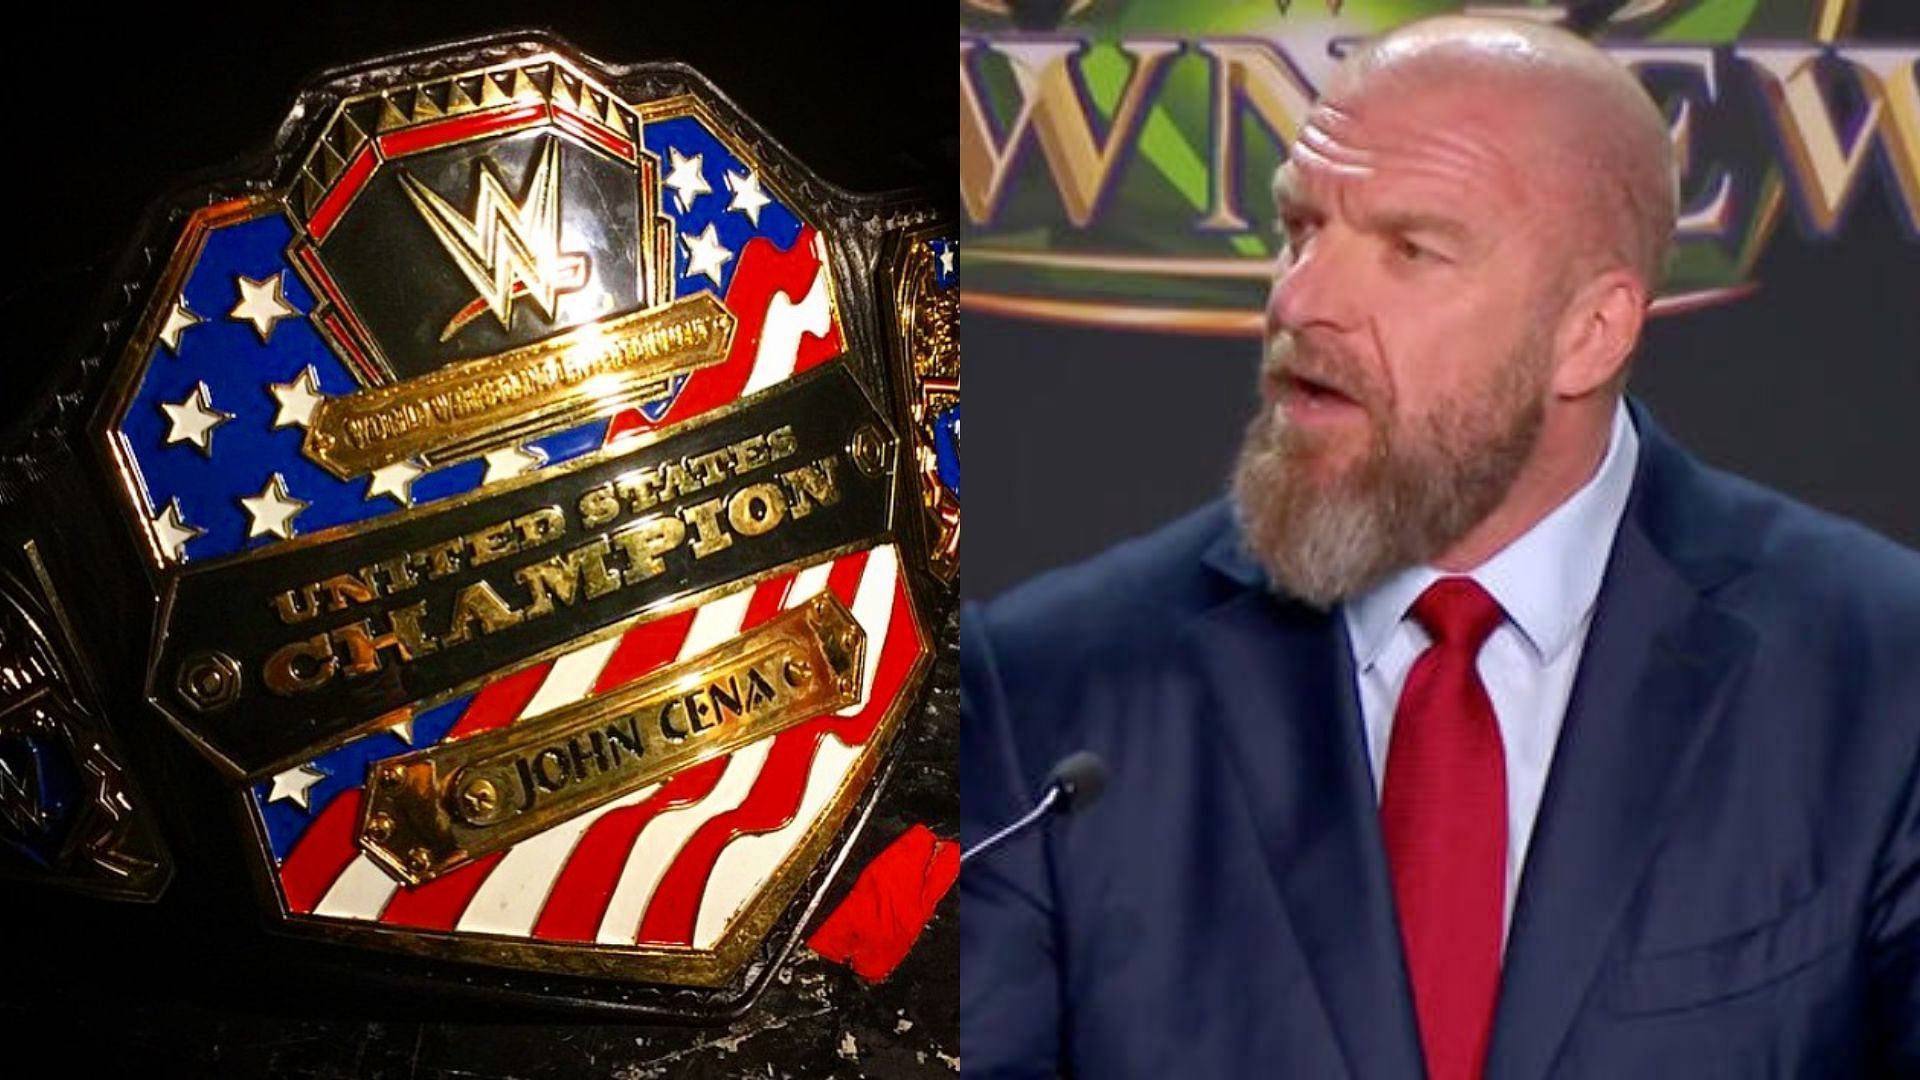 Triple H and the WWE United States Championship